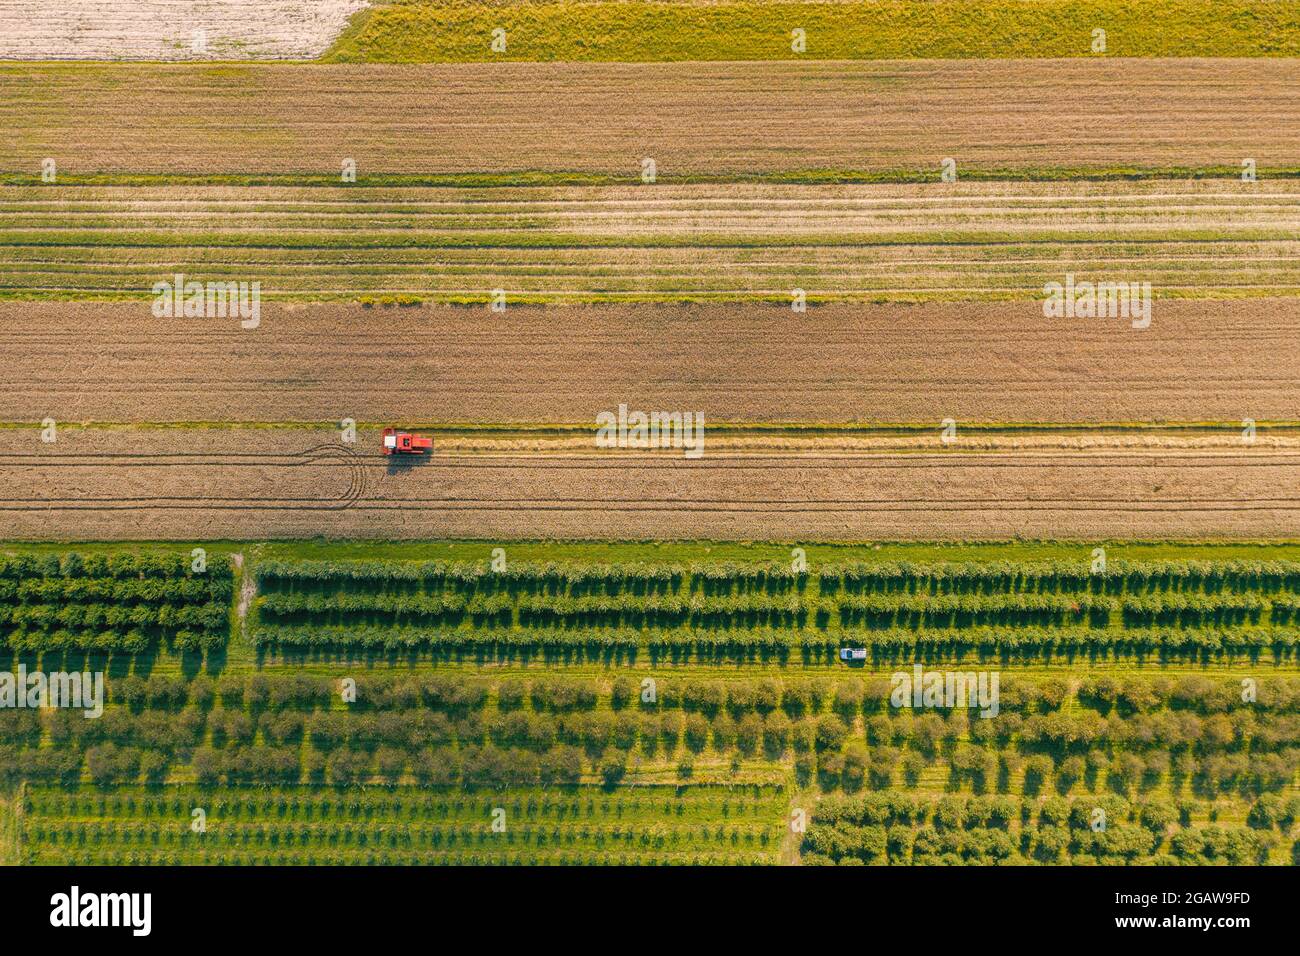 Drone picture of combine harvester  in the field Stock Photo